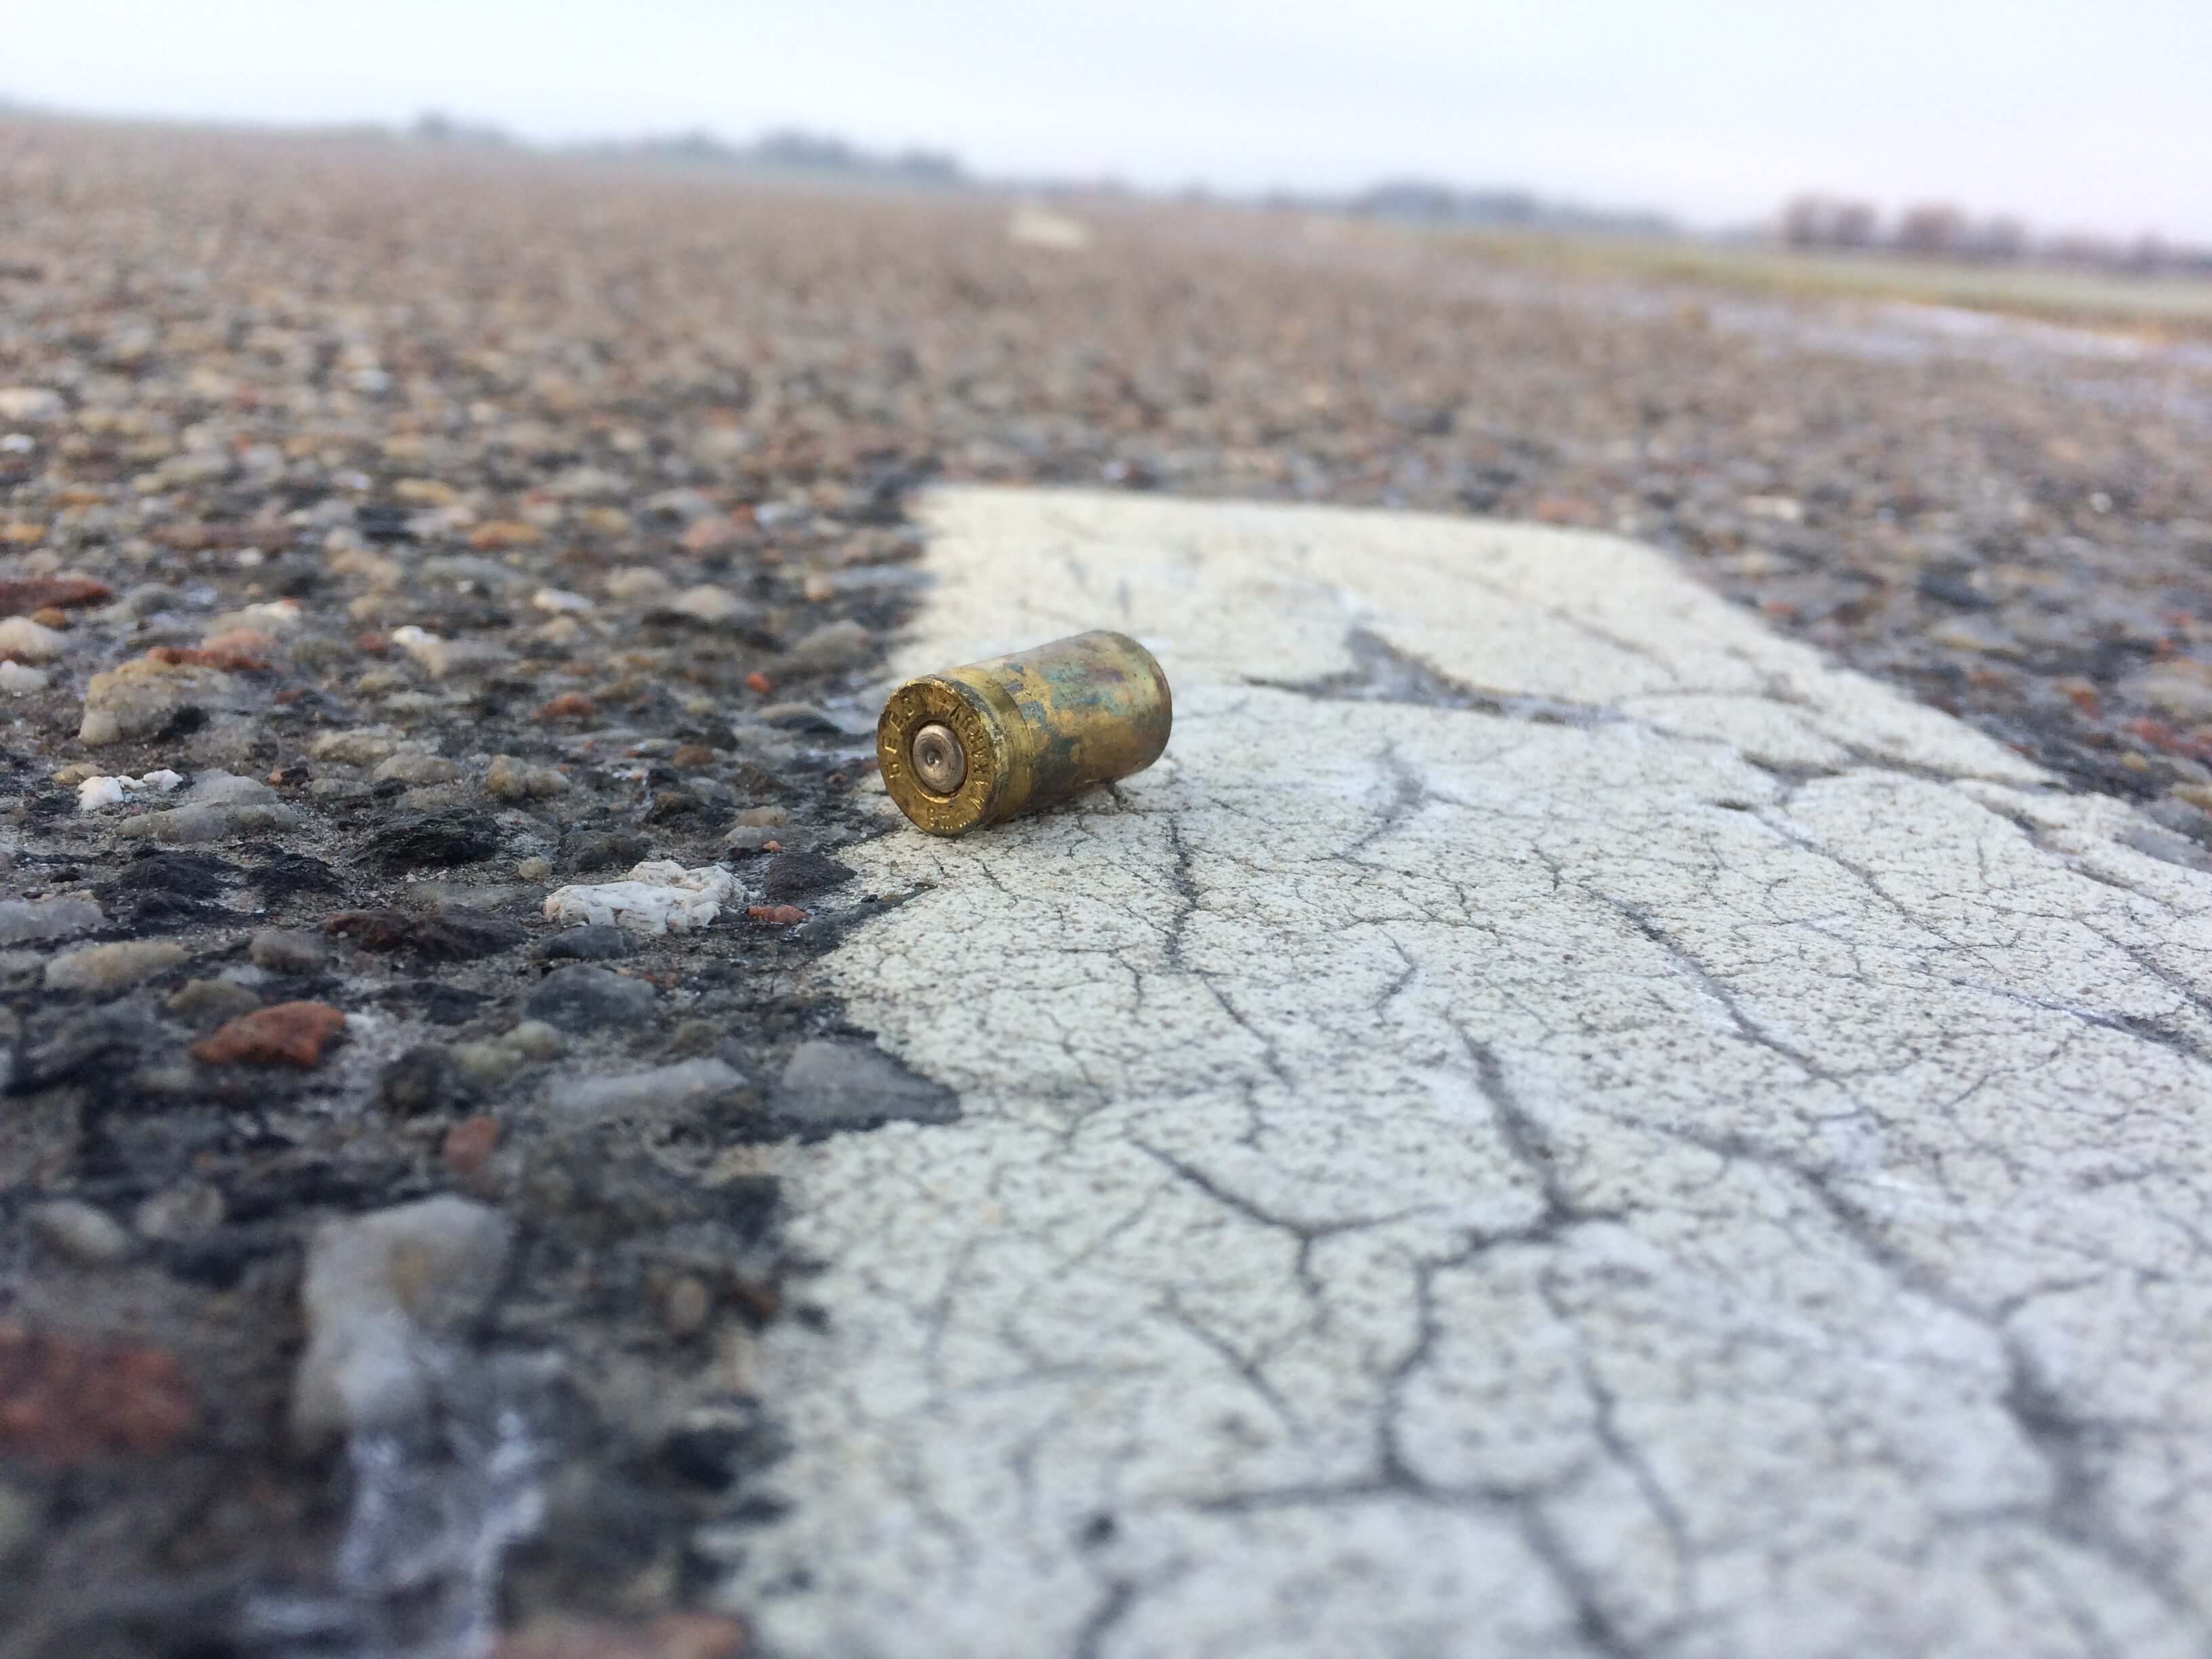 Bullet casing on the ground